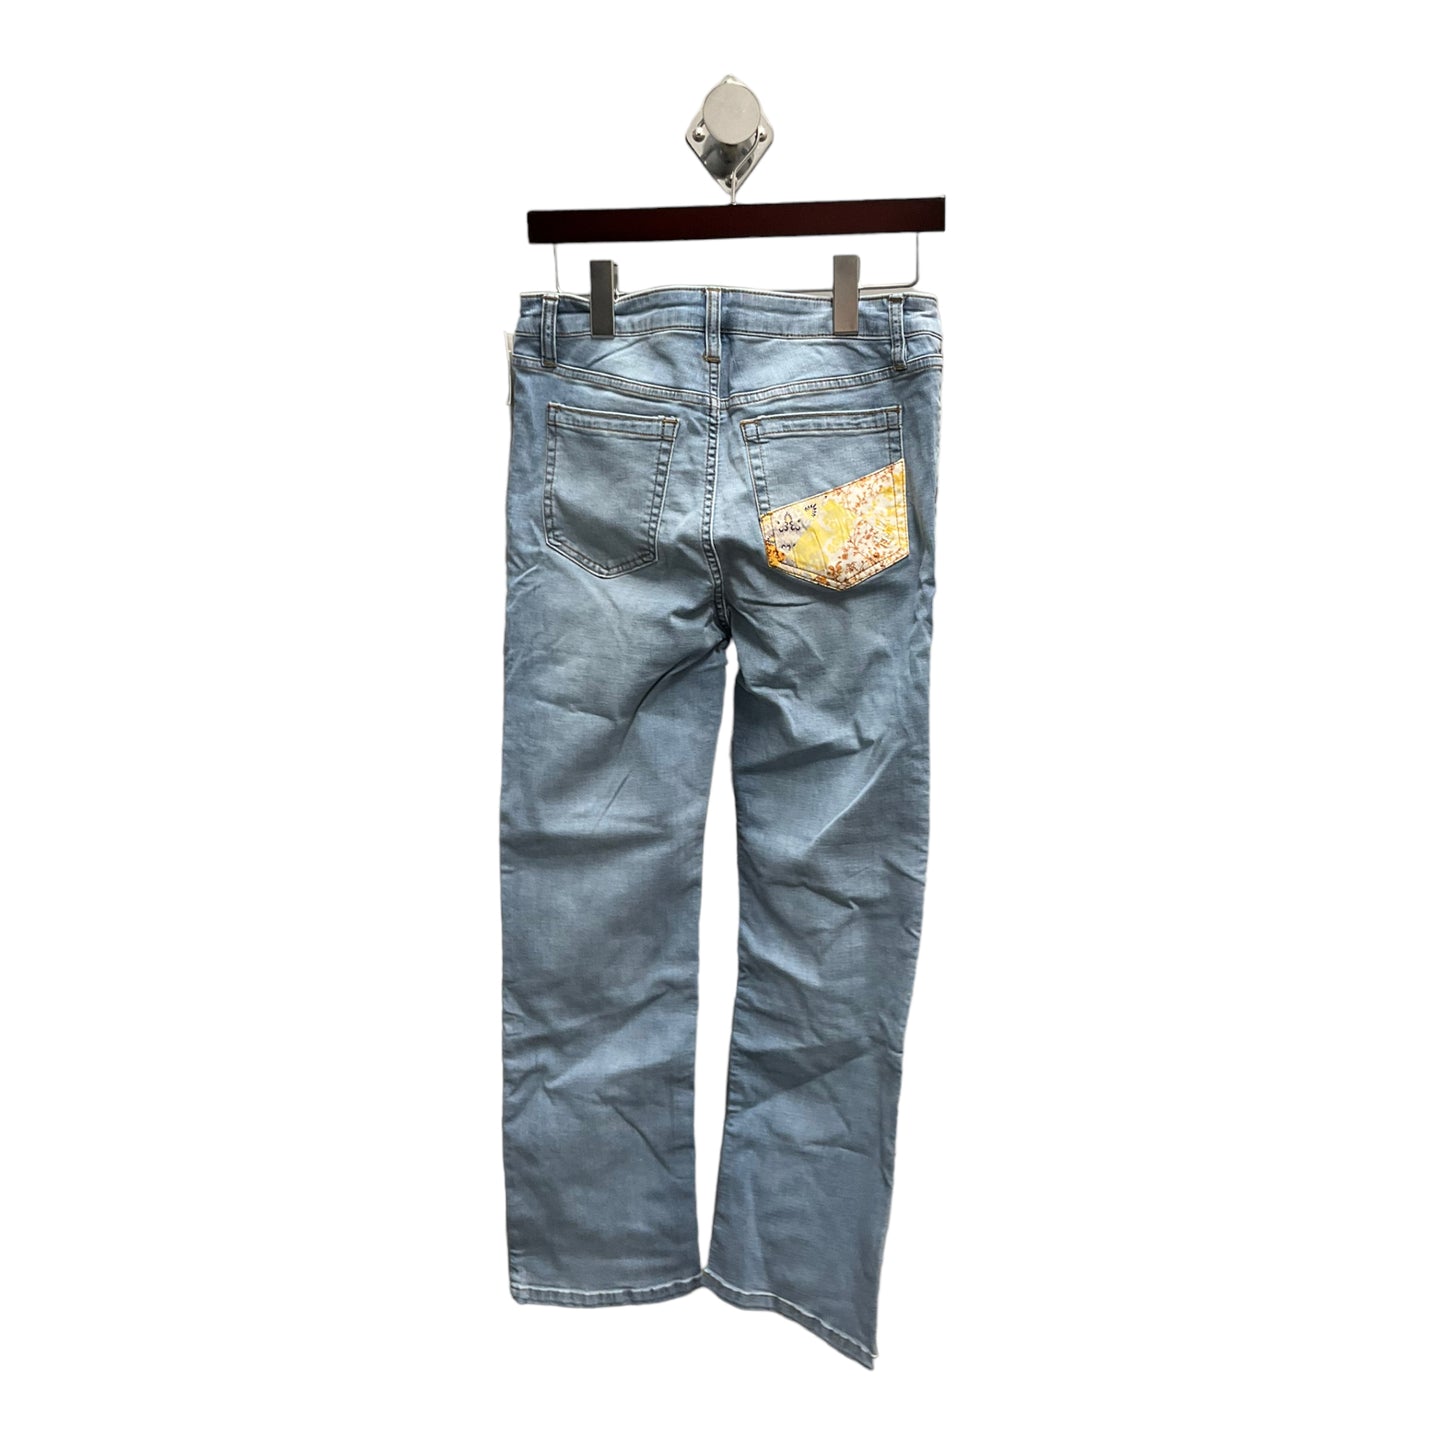 Jeans Straight By Matilda Jane  Size: 6